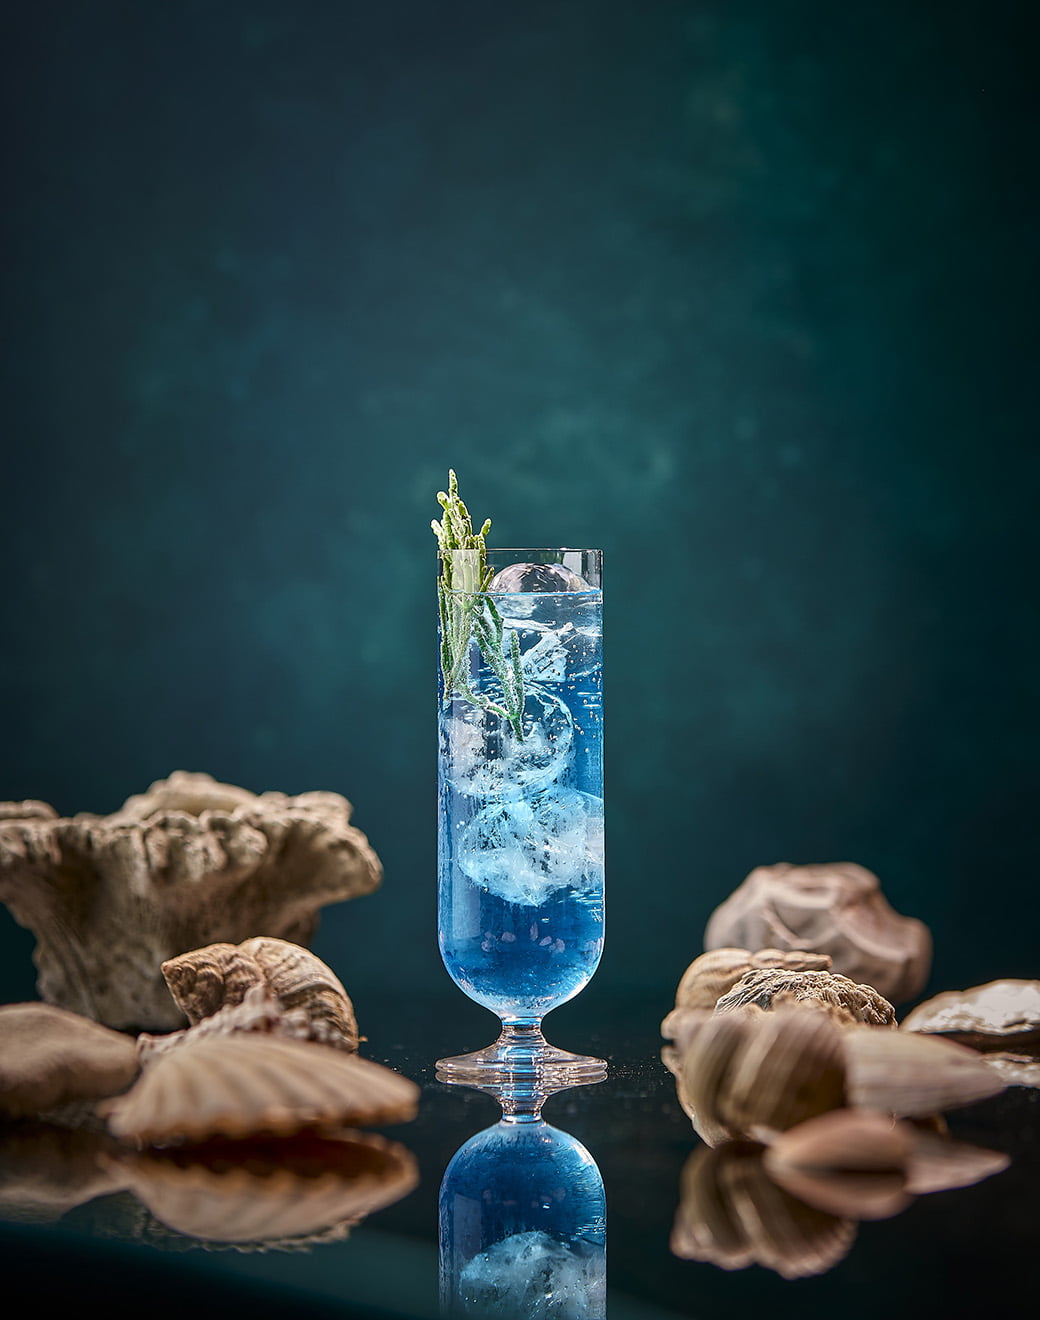 Reefresh'd from new cocktail menu ‘Once In A Lifetime’ at St James Bar - Sofitel London St James